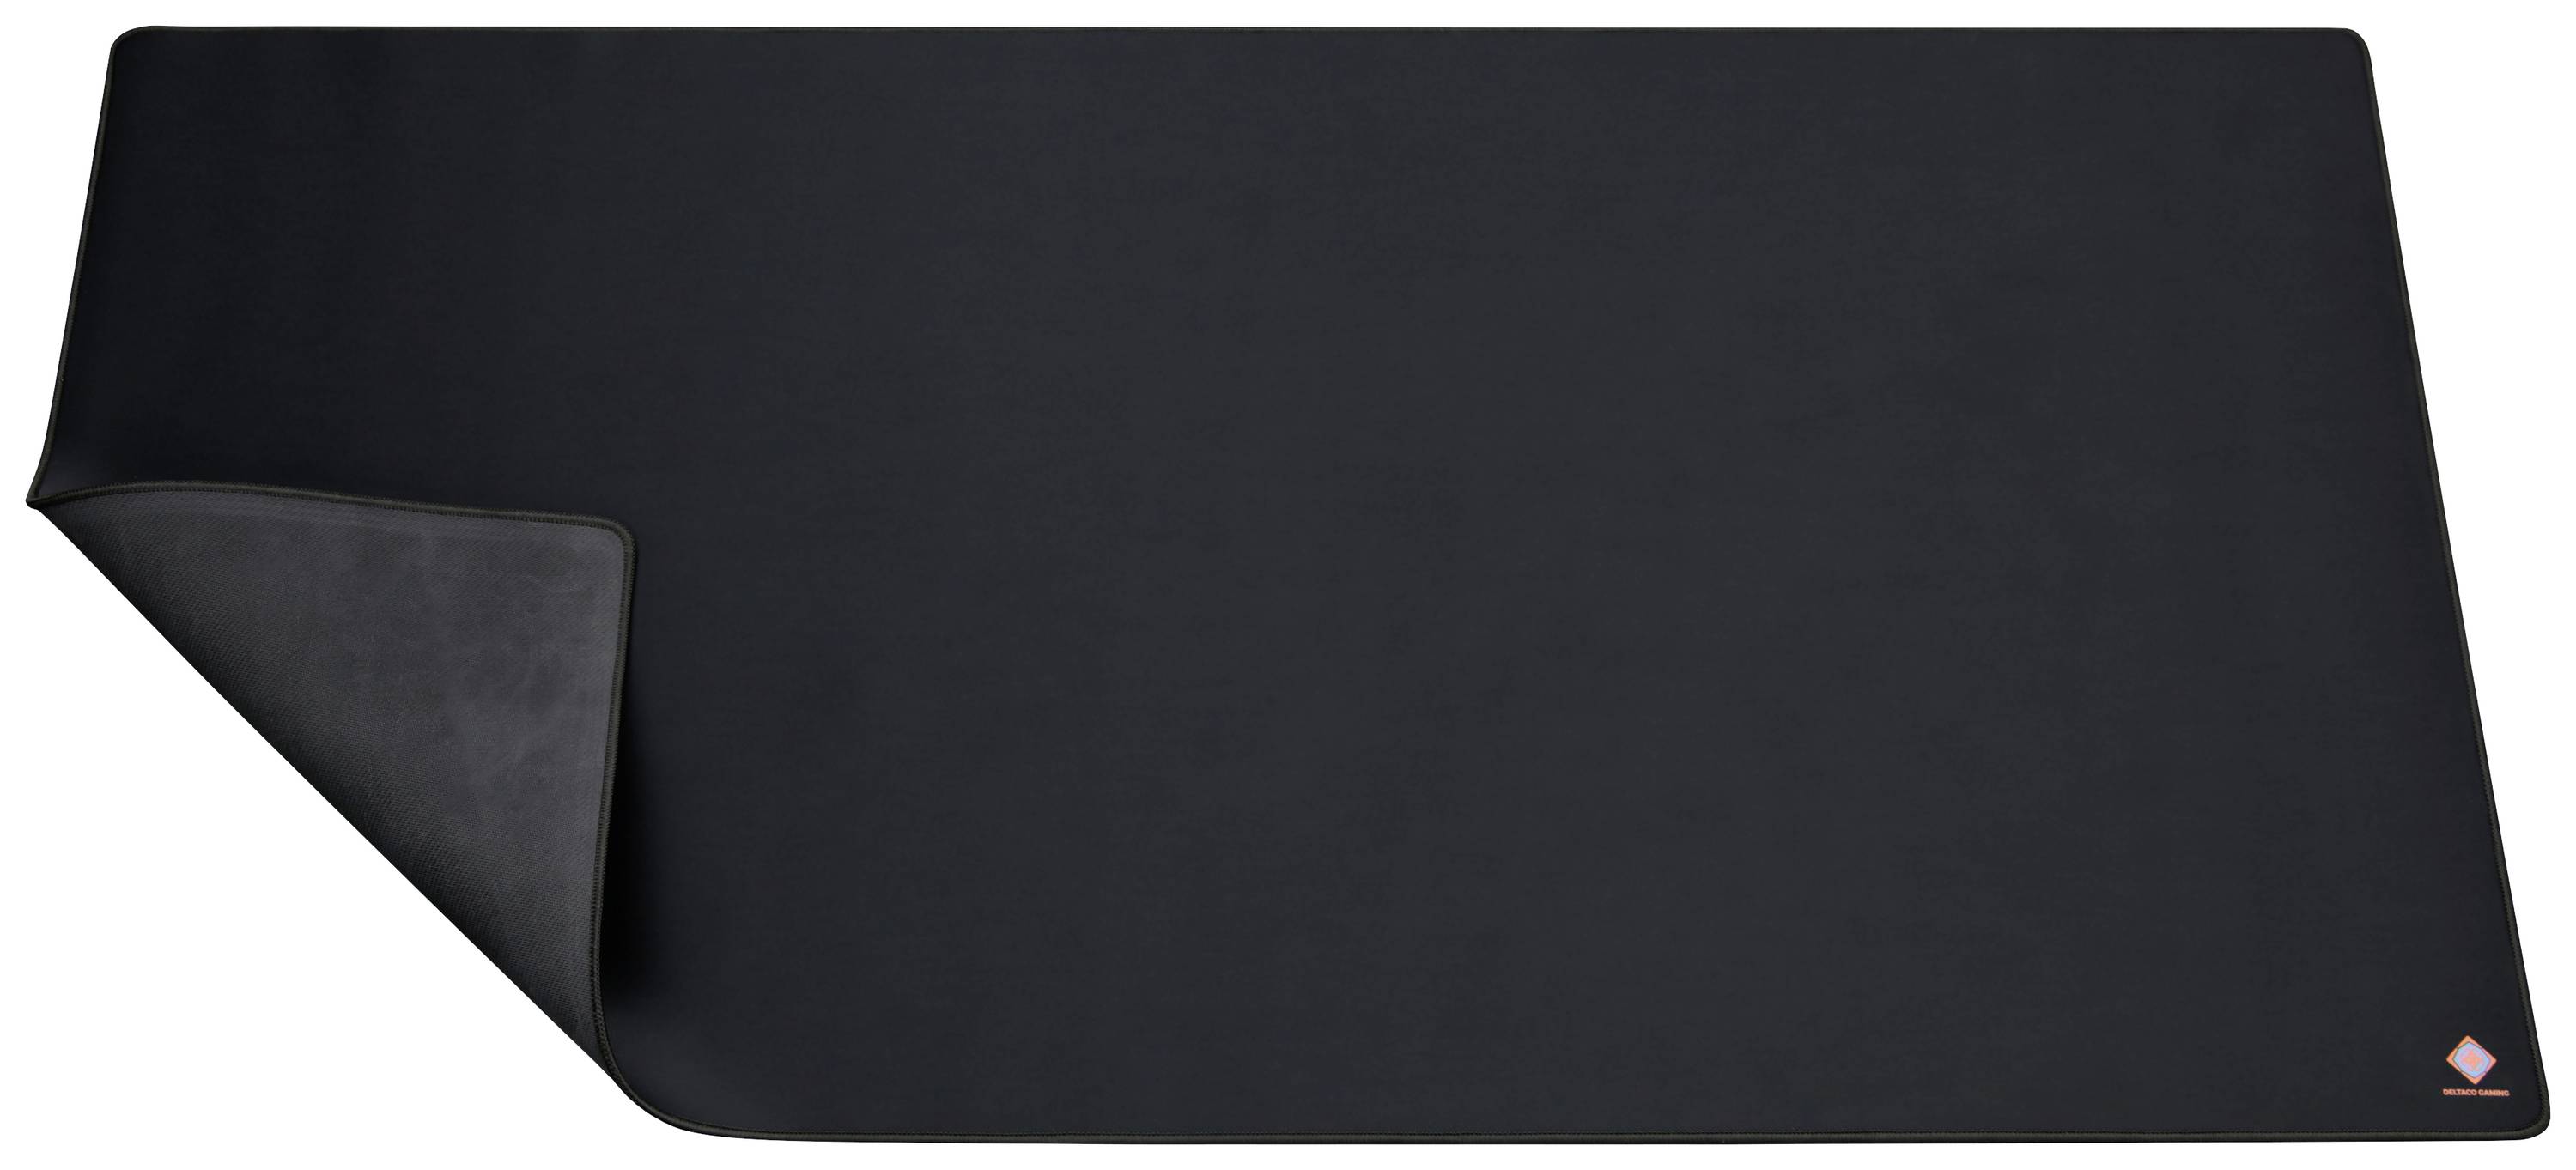 DELTACO GAMING GAM-081 Gaming mouse pad Non-slip Black (W x D) 1200 mm x  600 mm